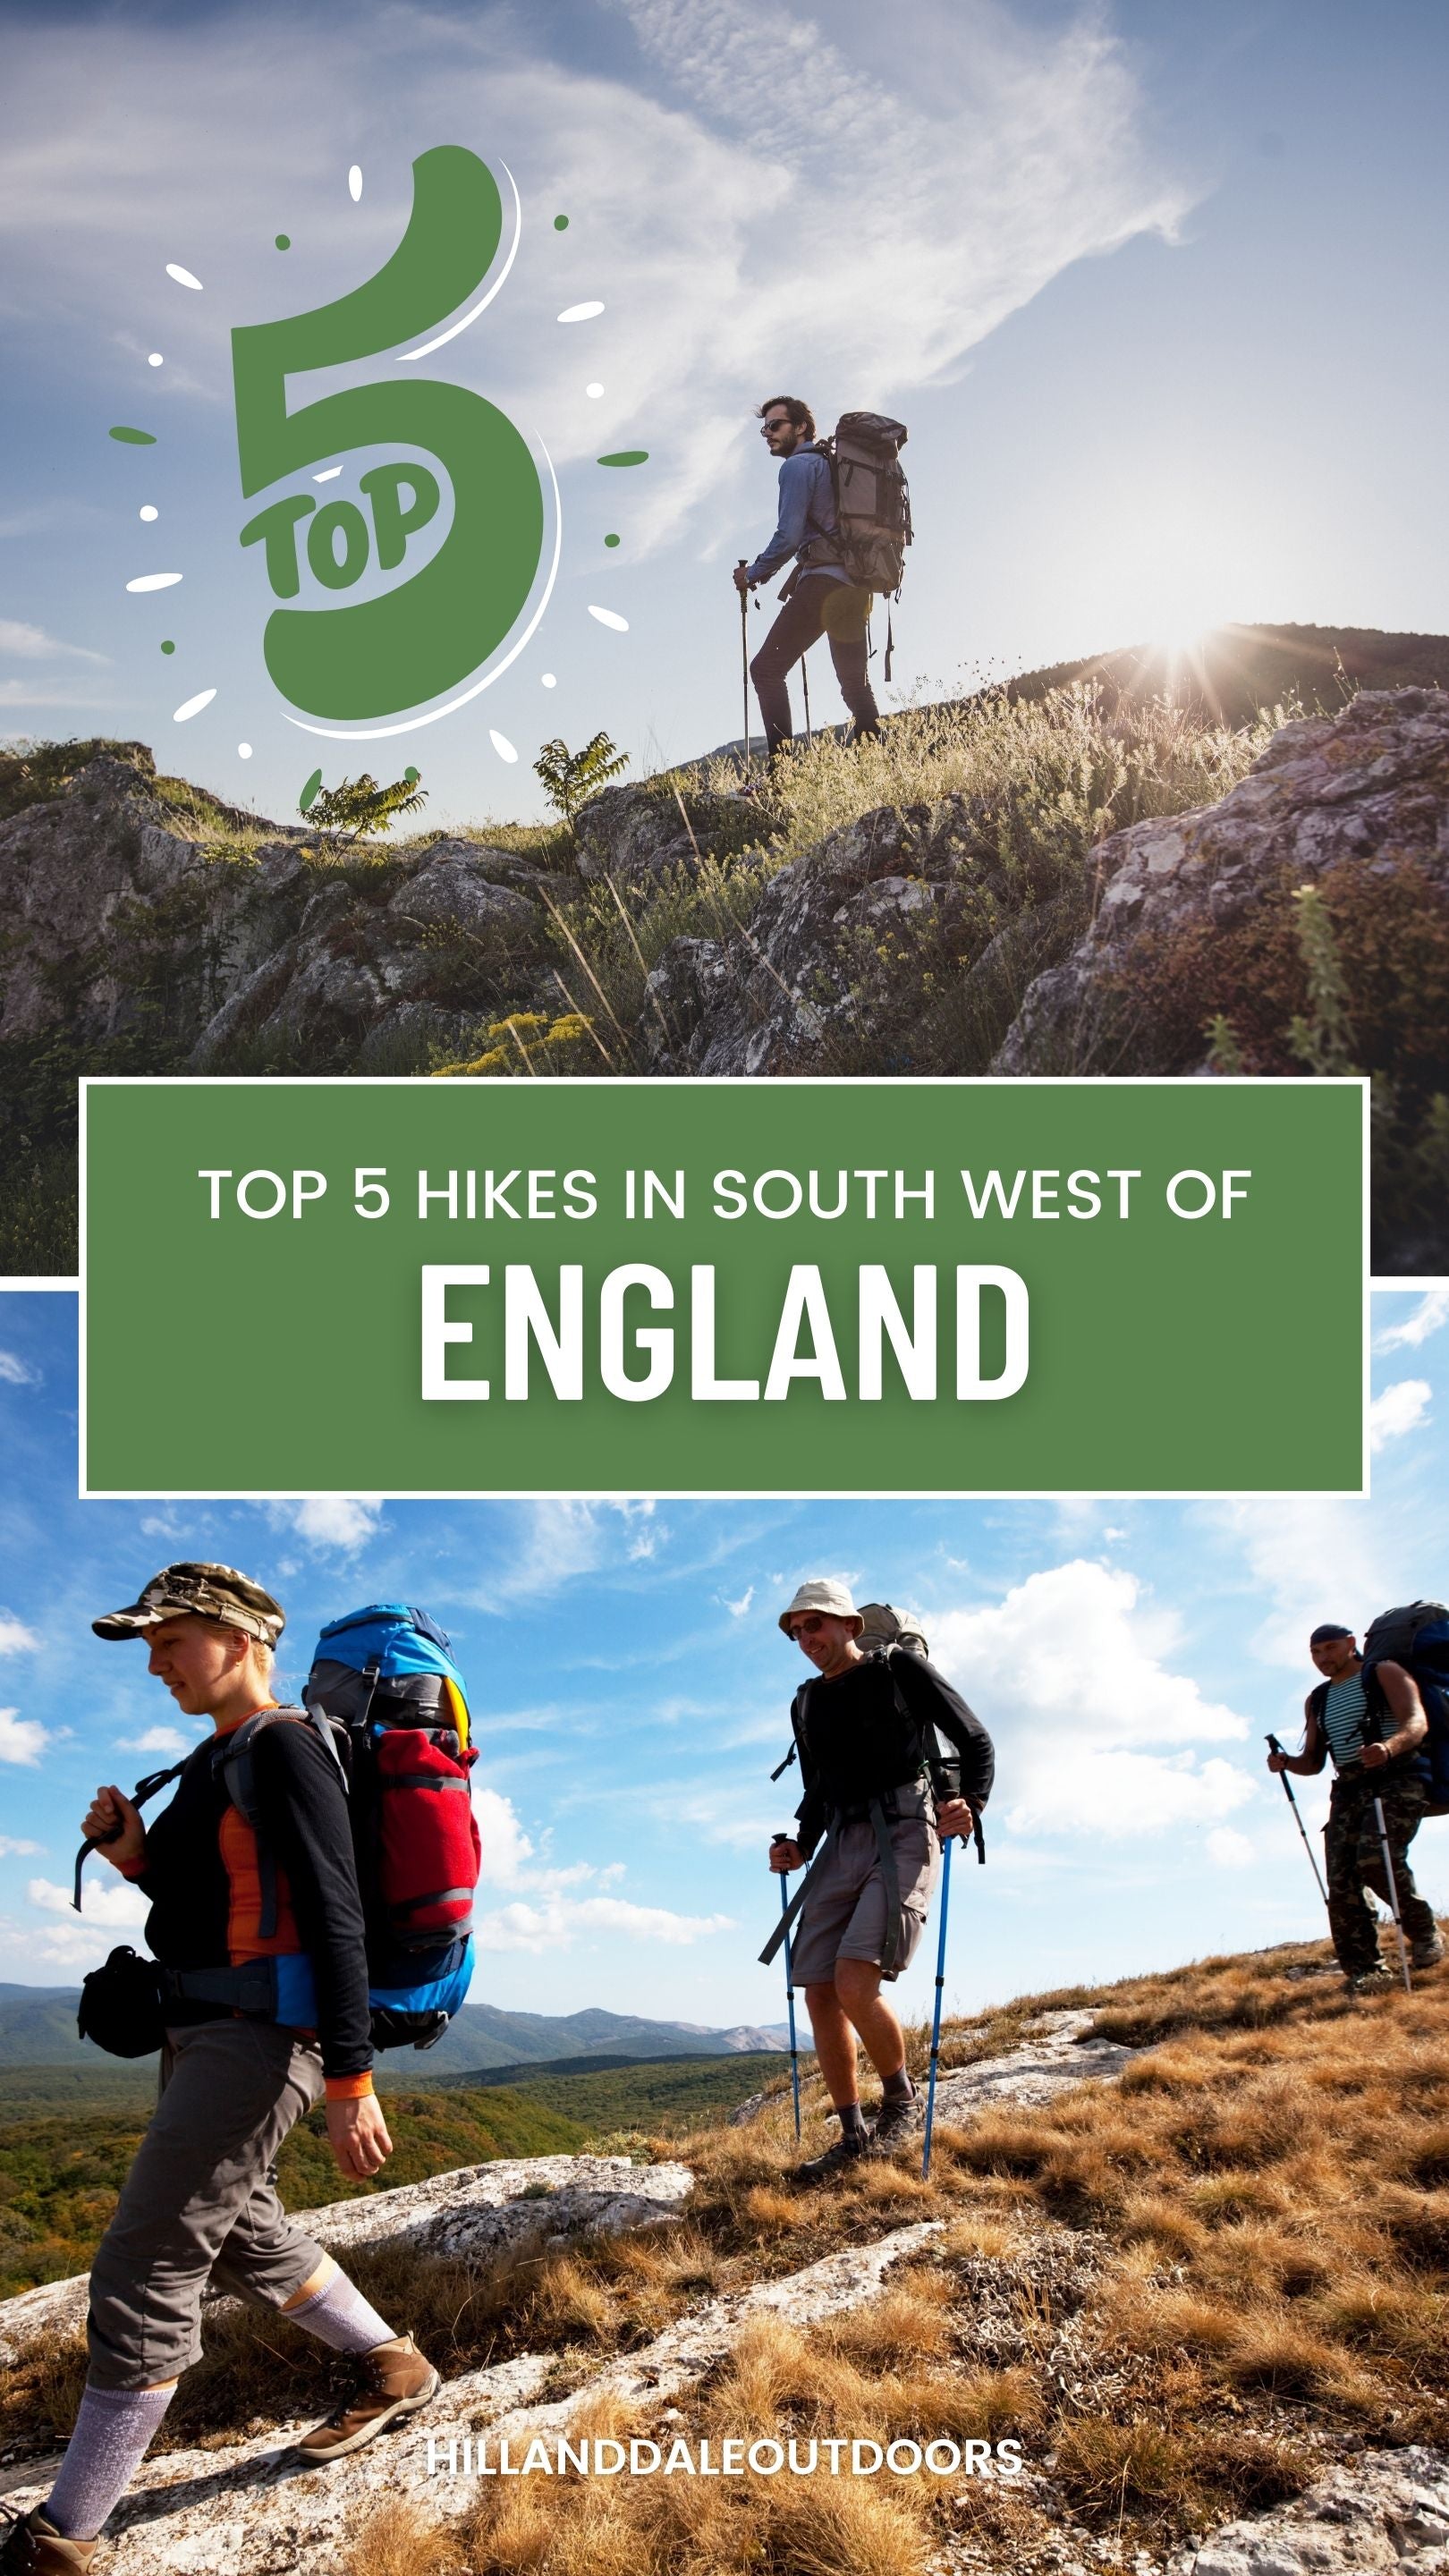 Top 5 Hikes in the South West